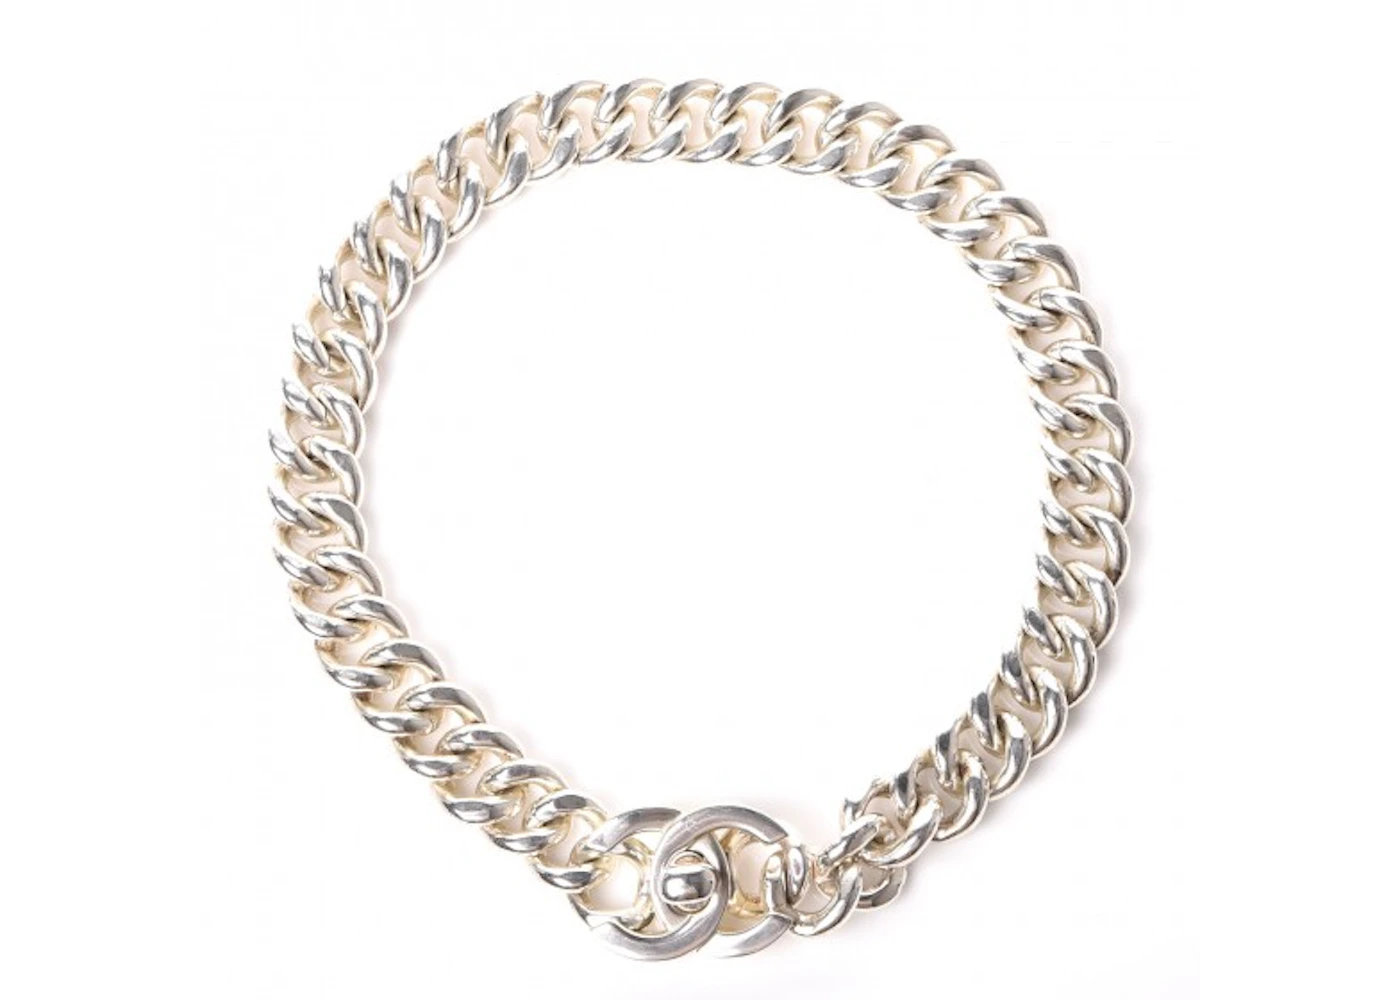 Chanel CC Choker Necklace Chain Link in Silver-Tone Metal with Silver-Tone  - FR